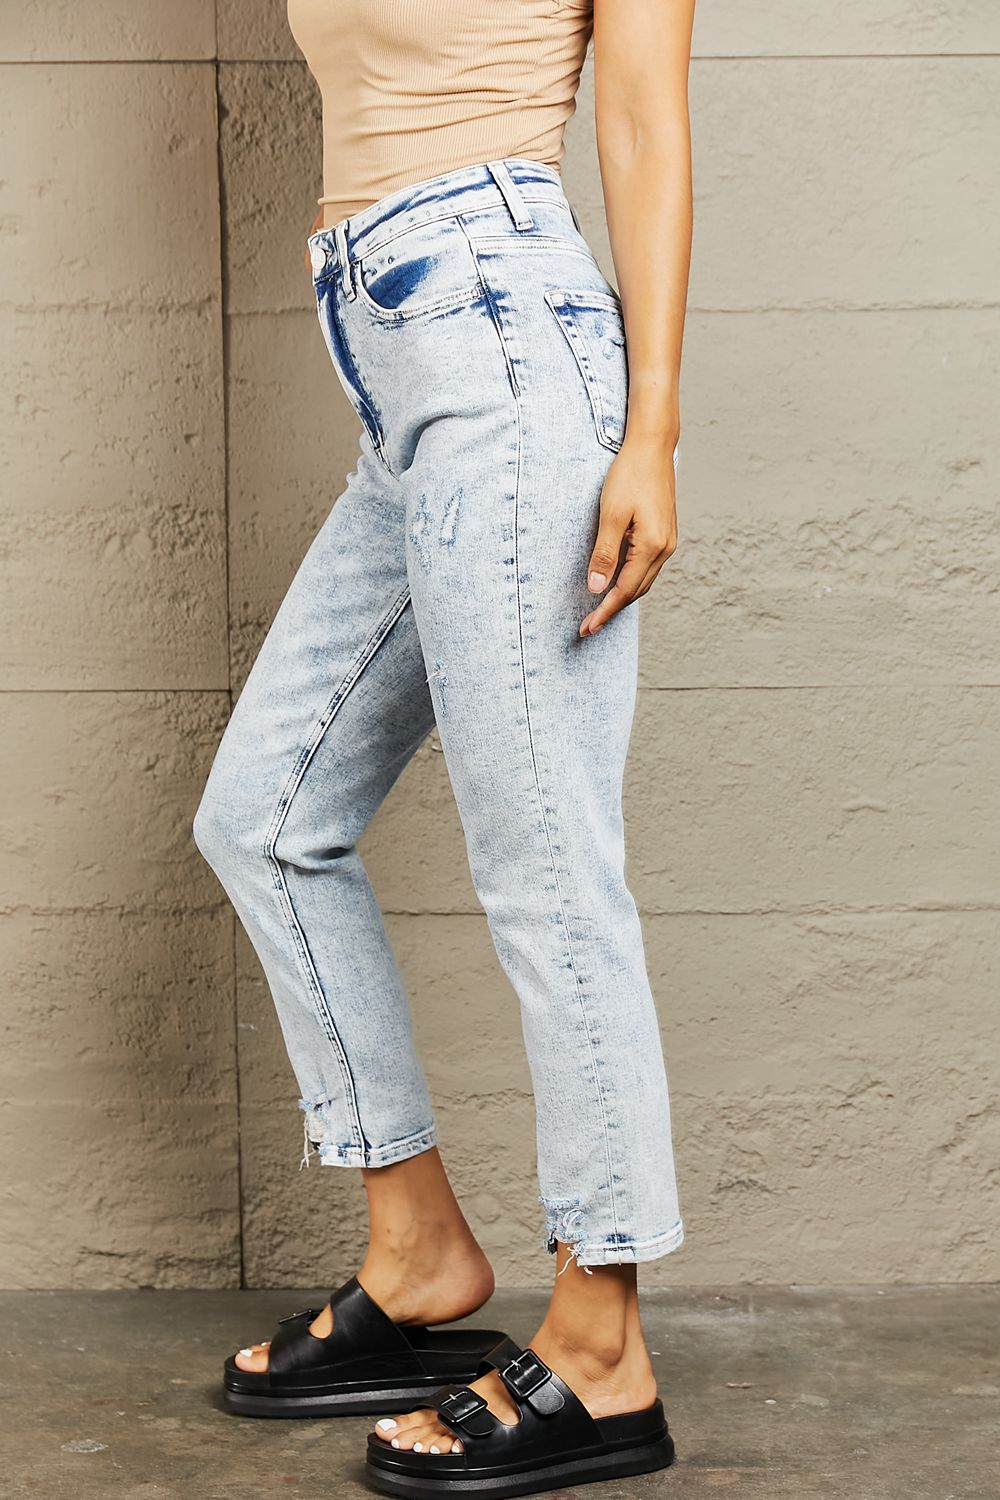 BAYEAS High Waisted Acid Wash Skinny Jeans - Jeans - FITGGINS